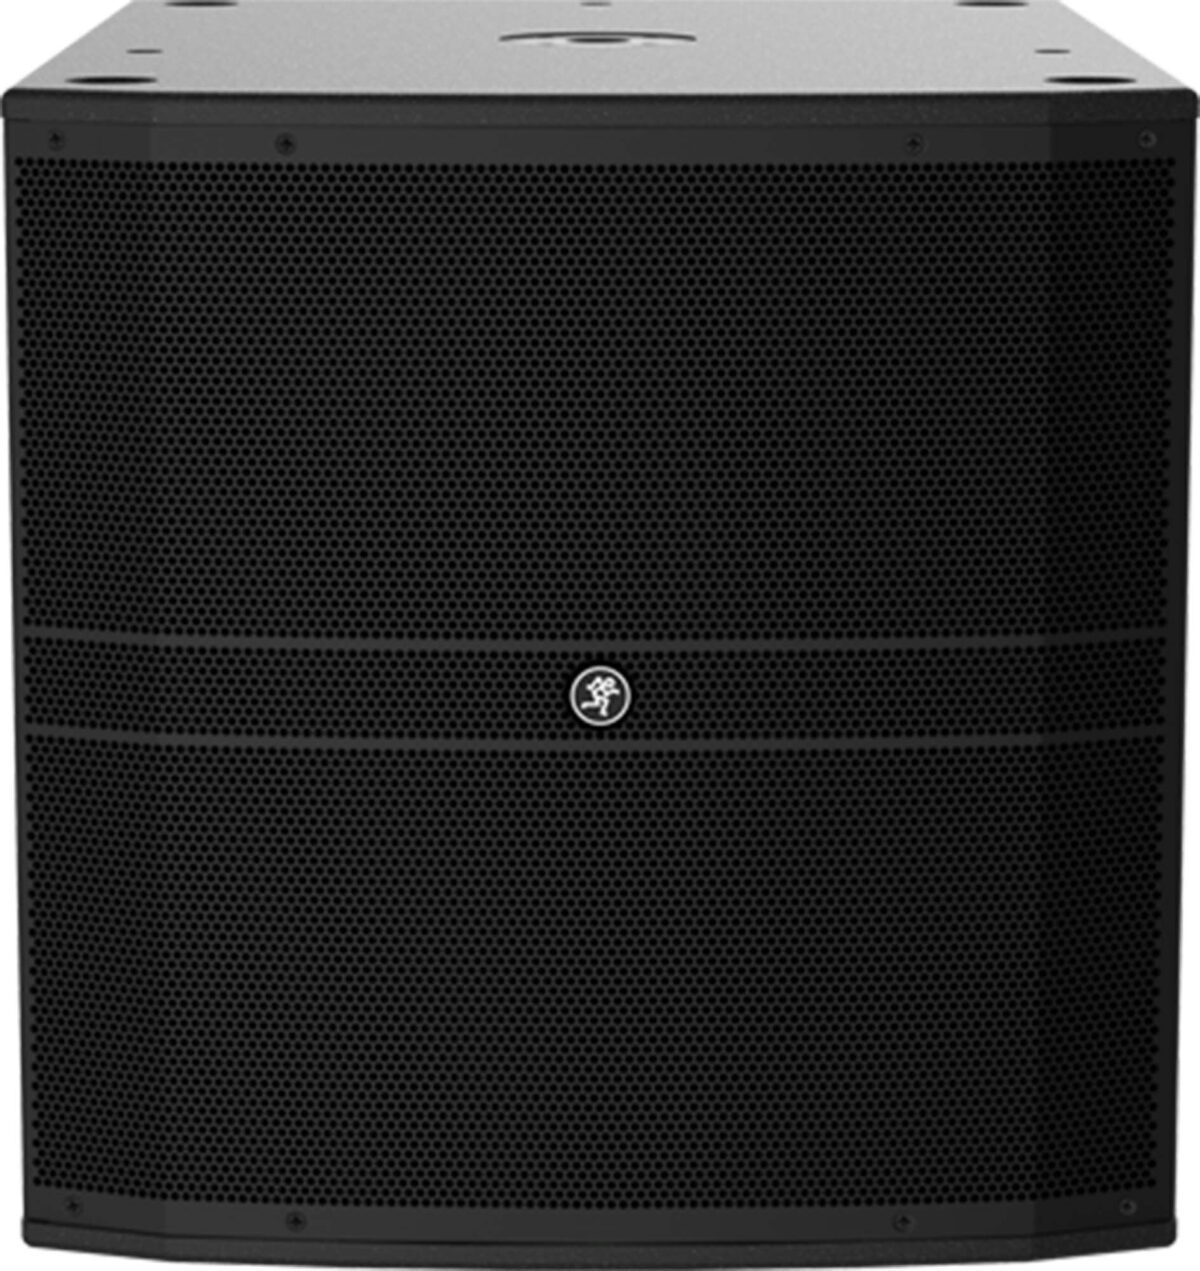 Mackie DRM18S-P 18" Professional Passive Subwoofer